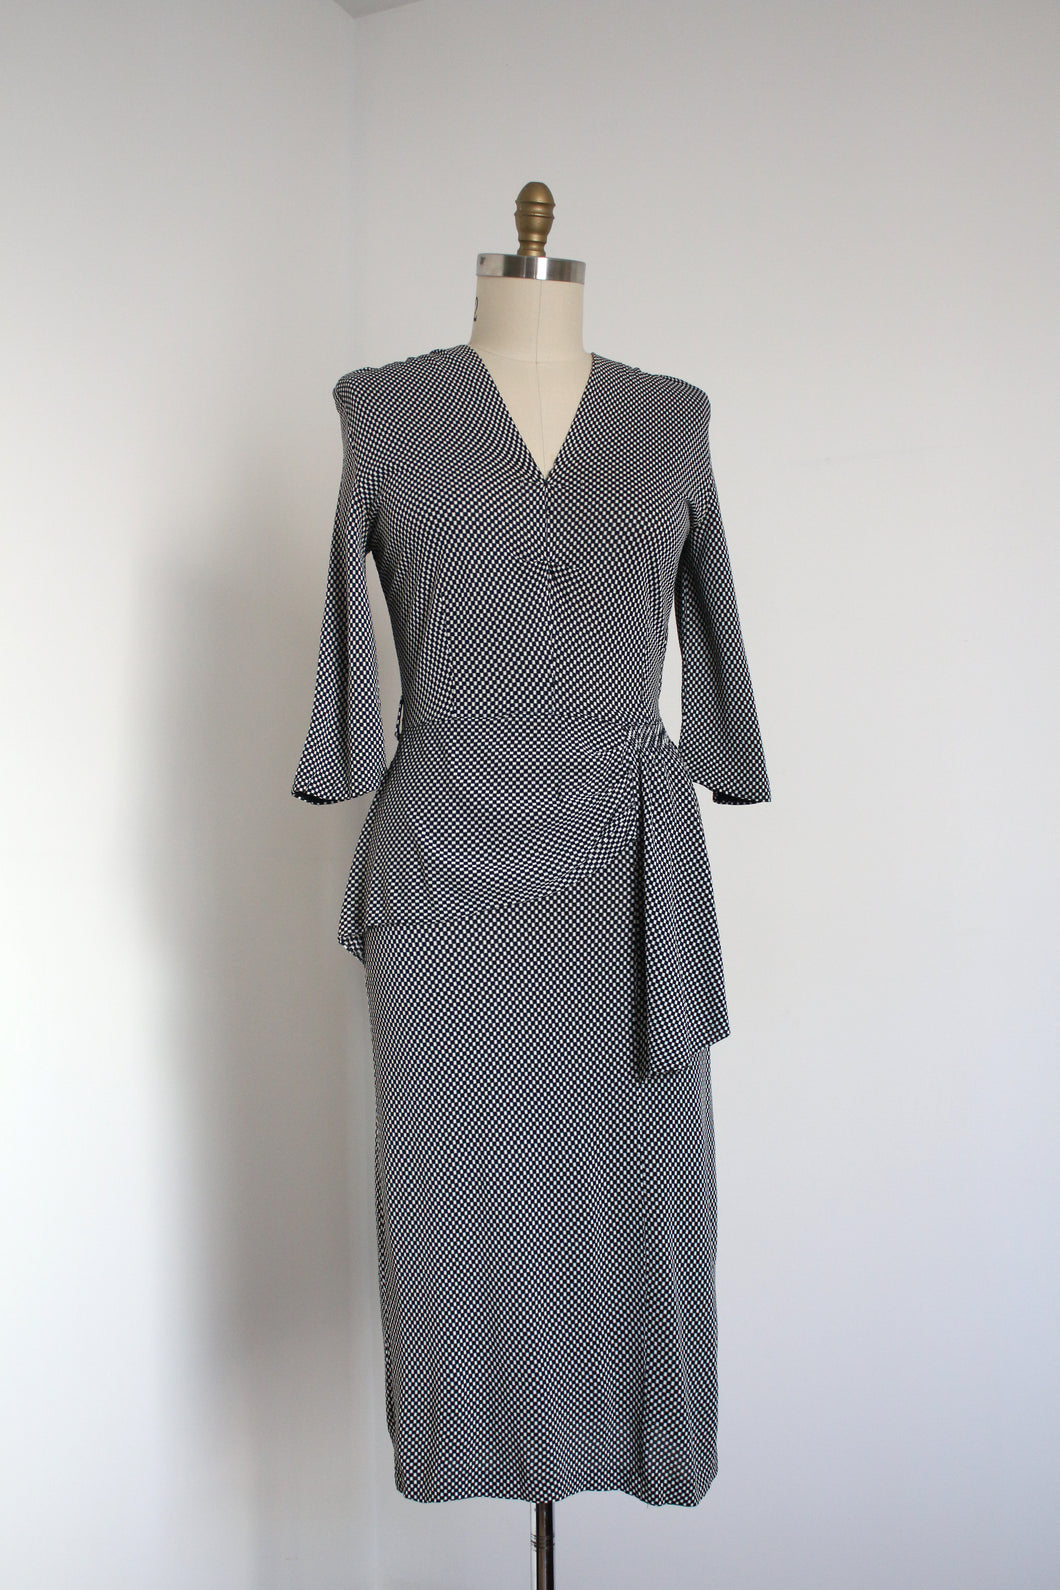 vintage 1940s checkered rayon jersey dress